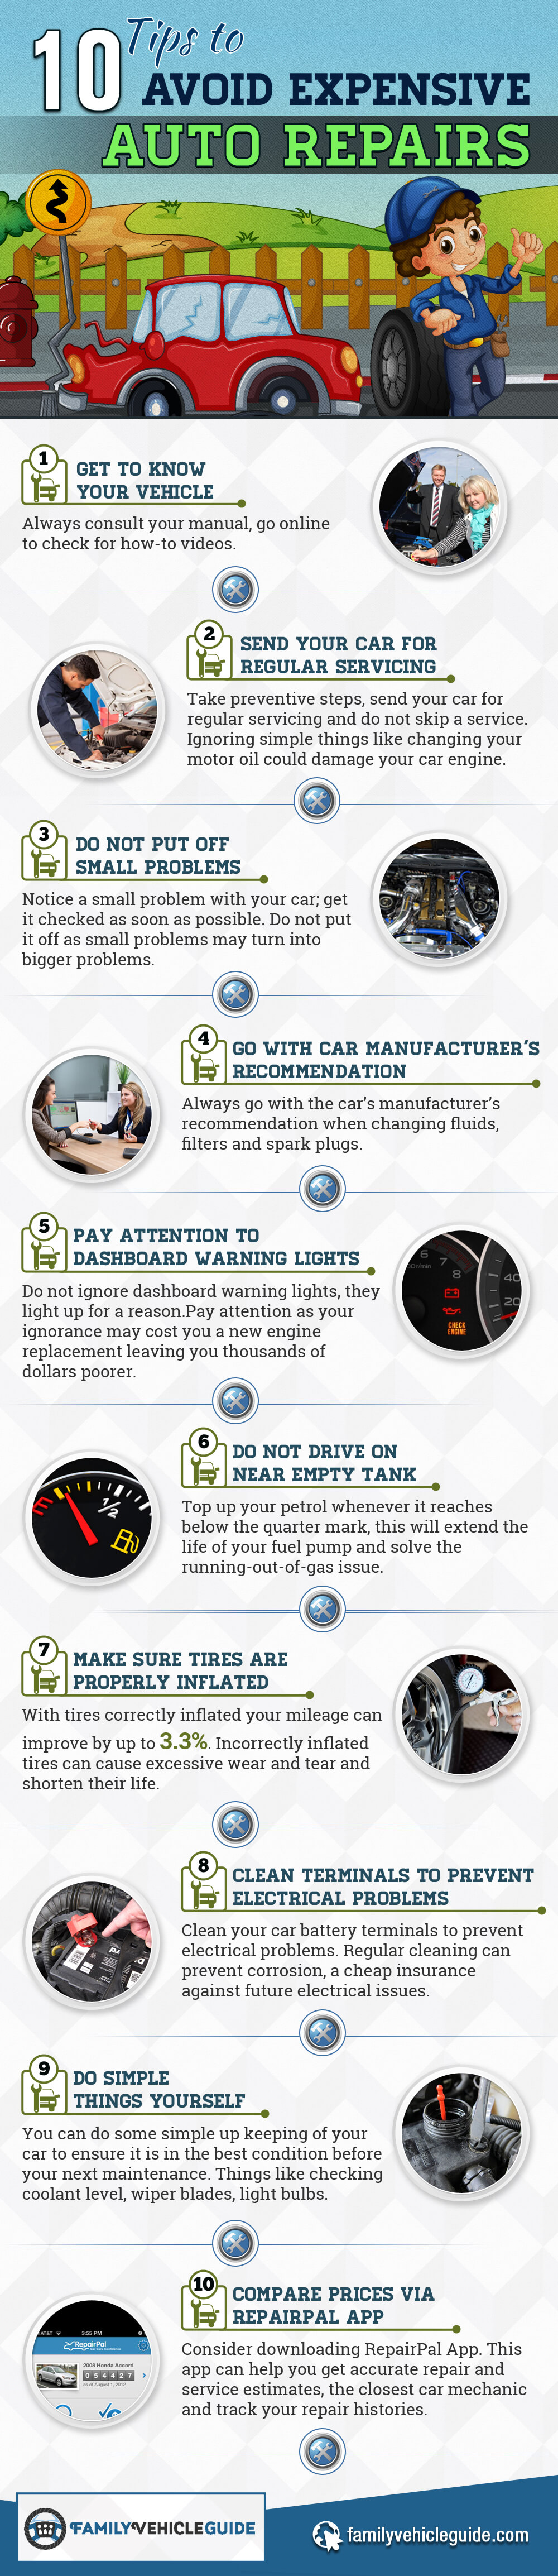 10_Tips_to_Avoid_Expensive_Auto_repairs_infographic